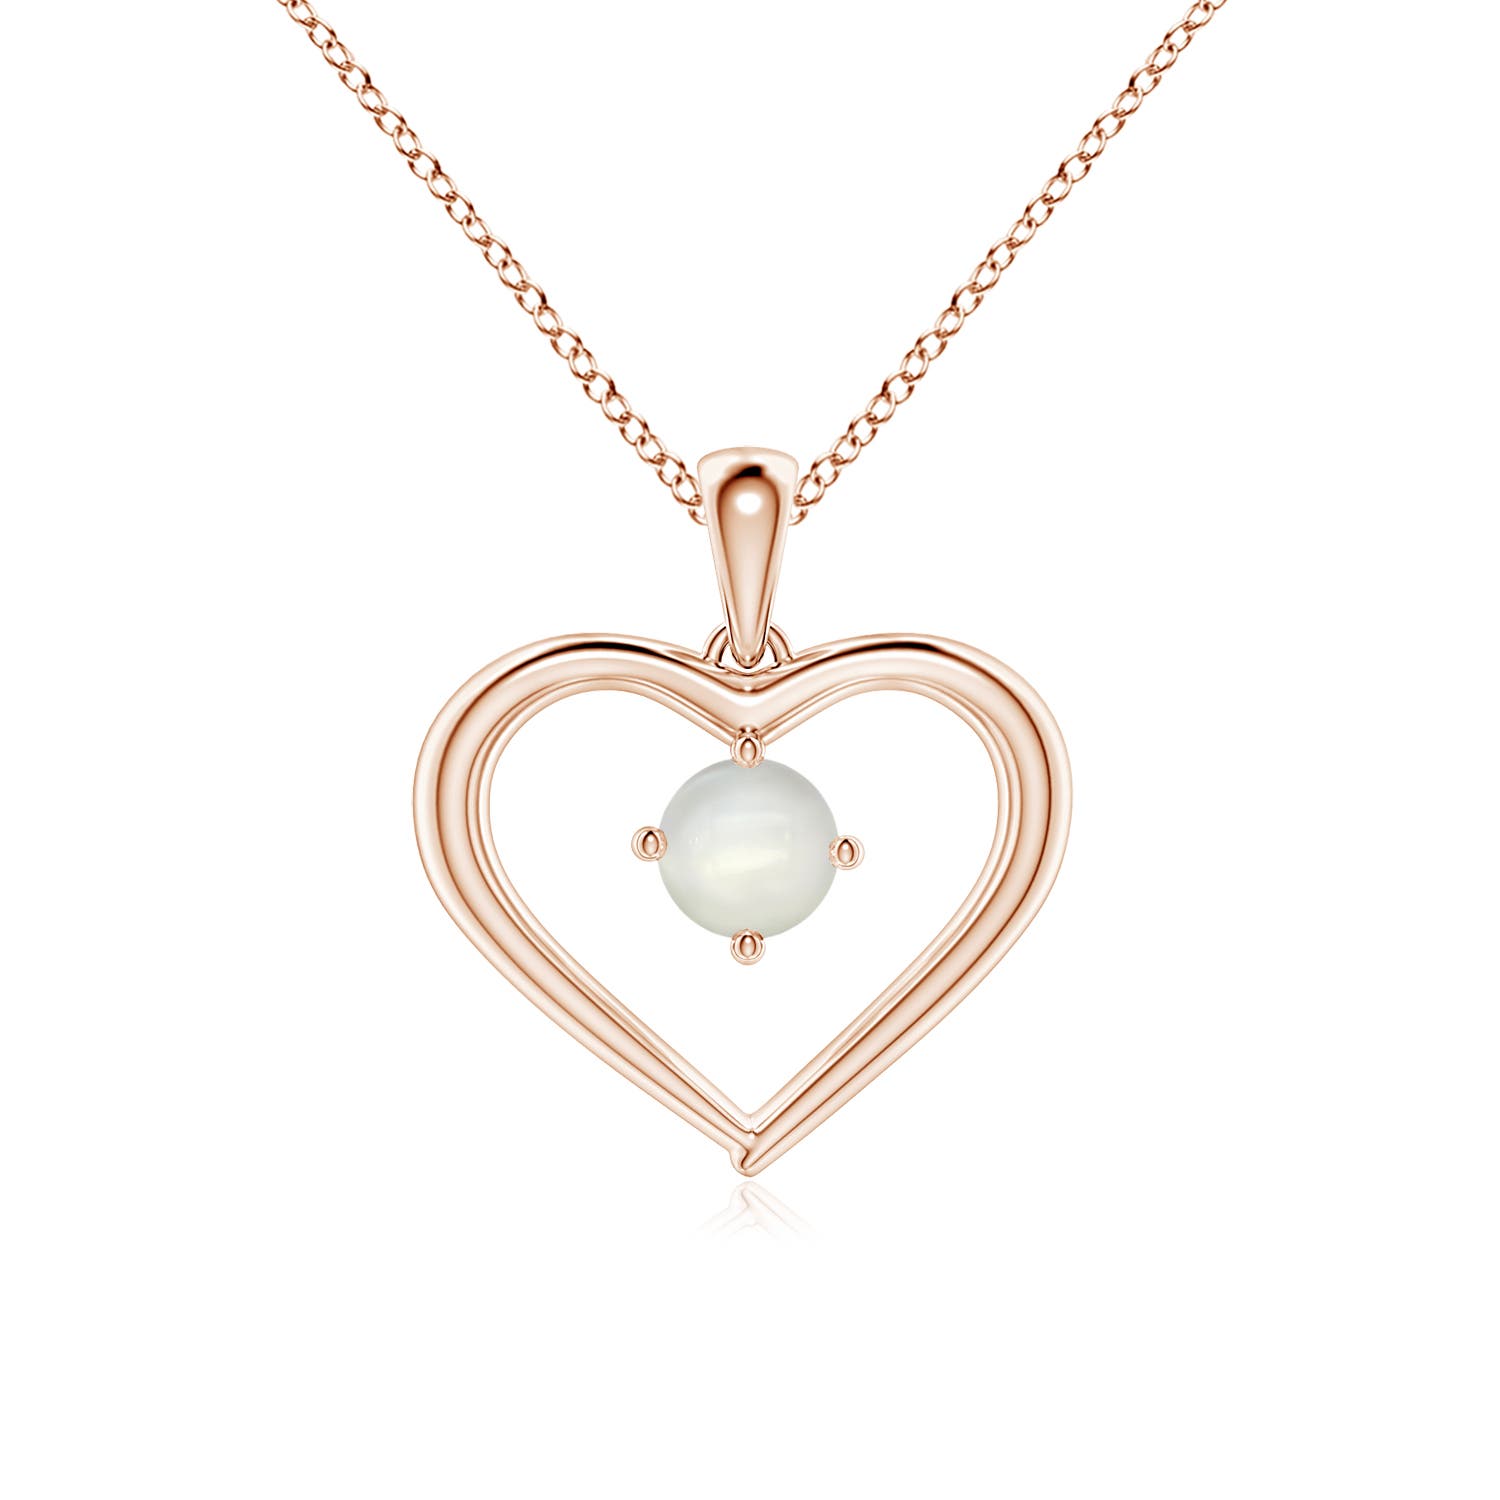 Angara Natural Moonstone Solitaire Pendant Necklace for Women in